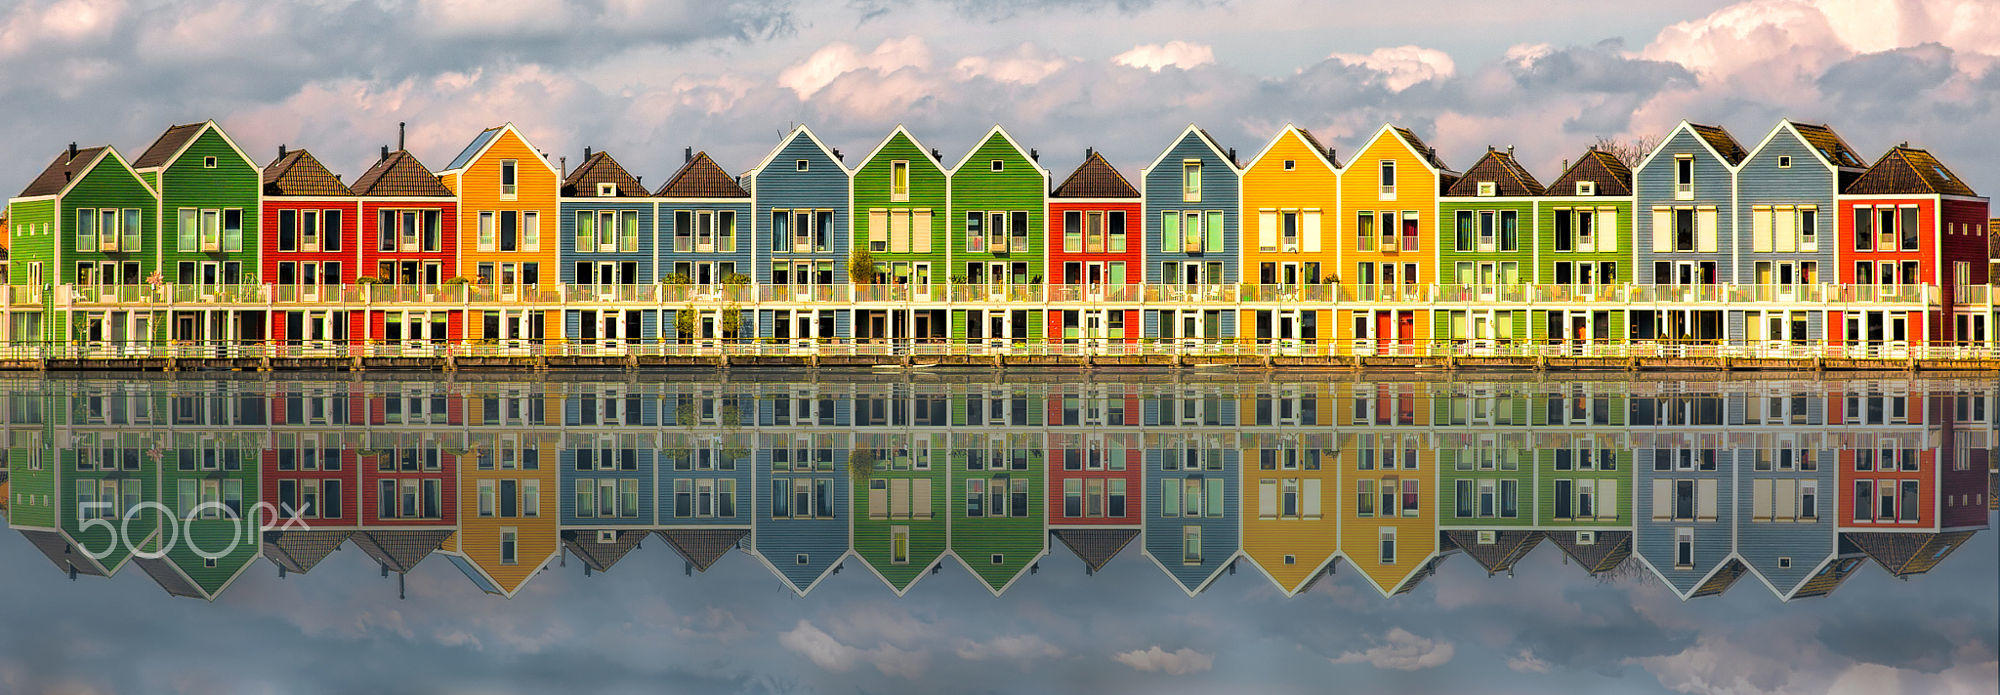 The colorful houses of Houten